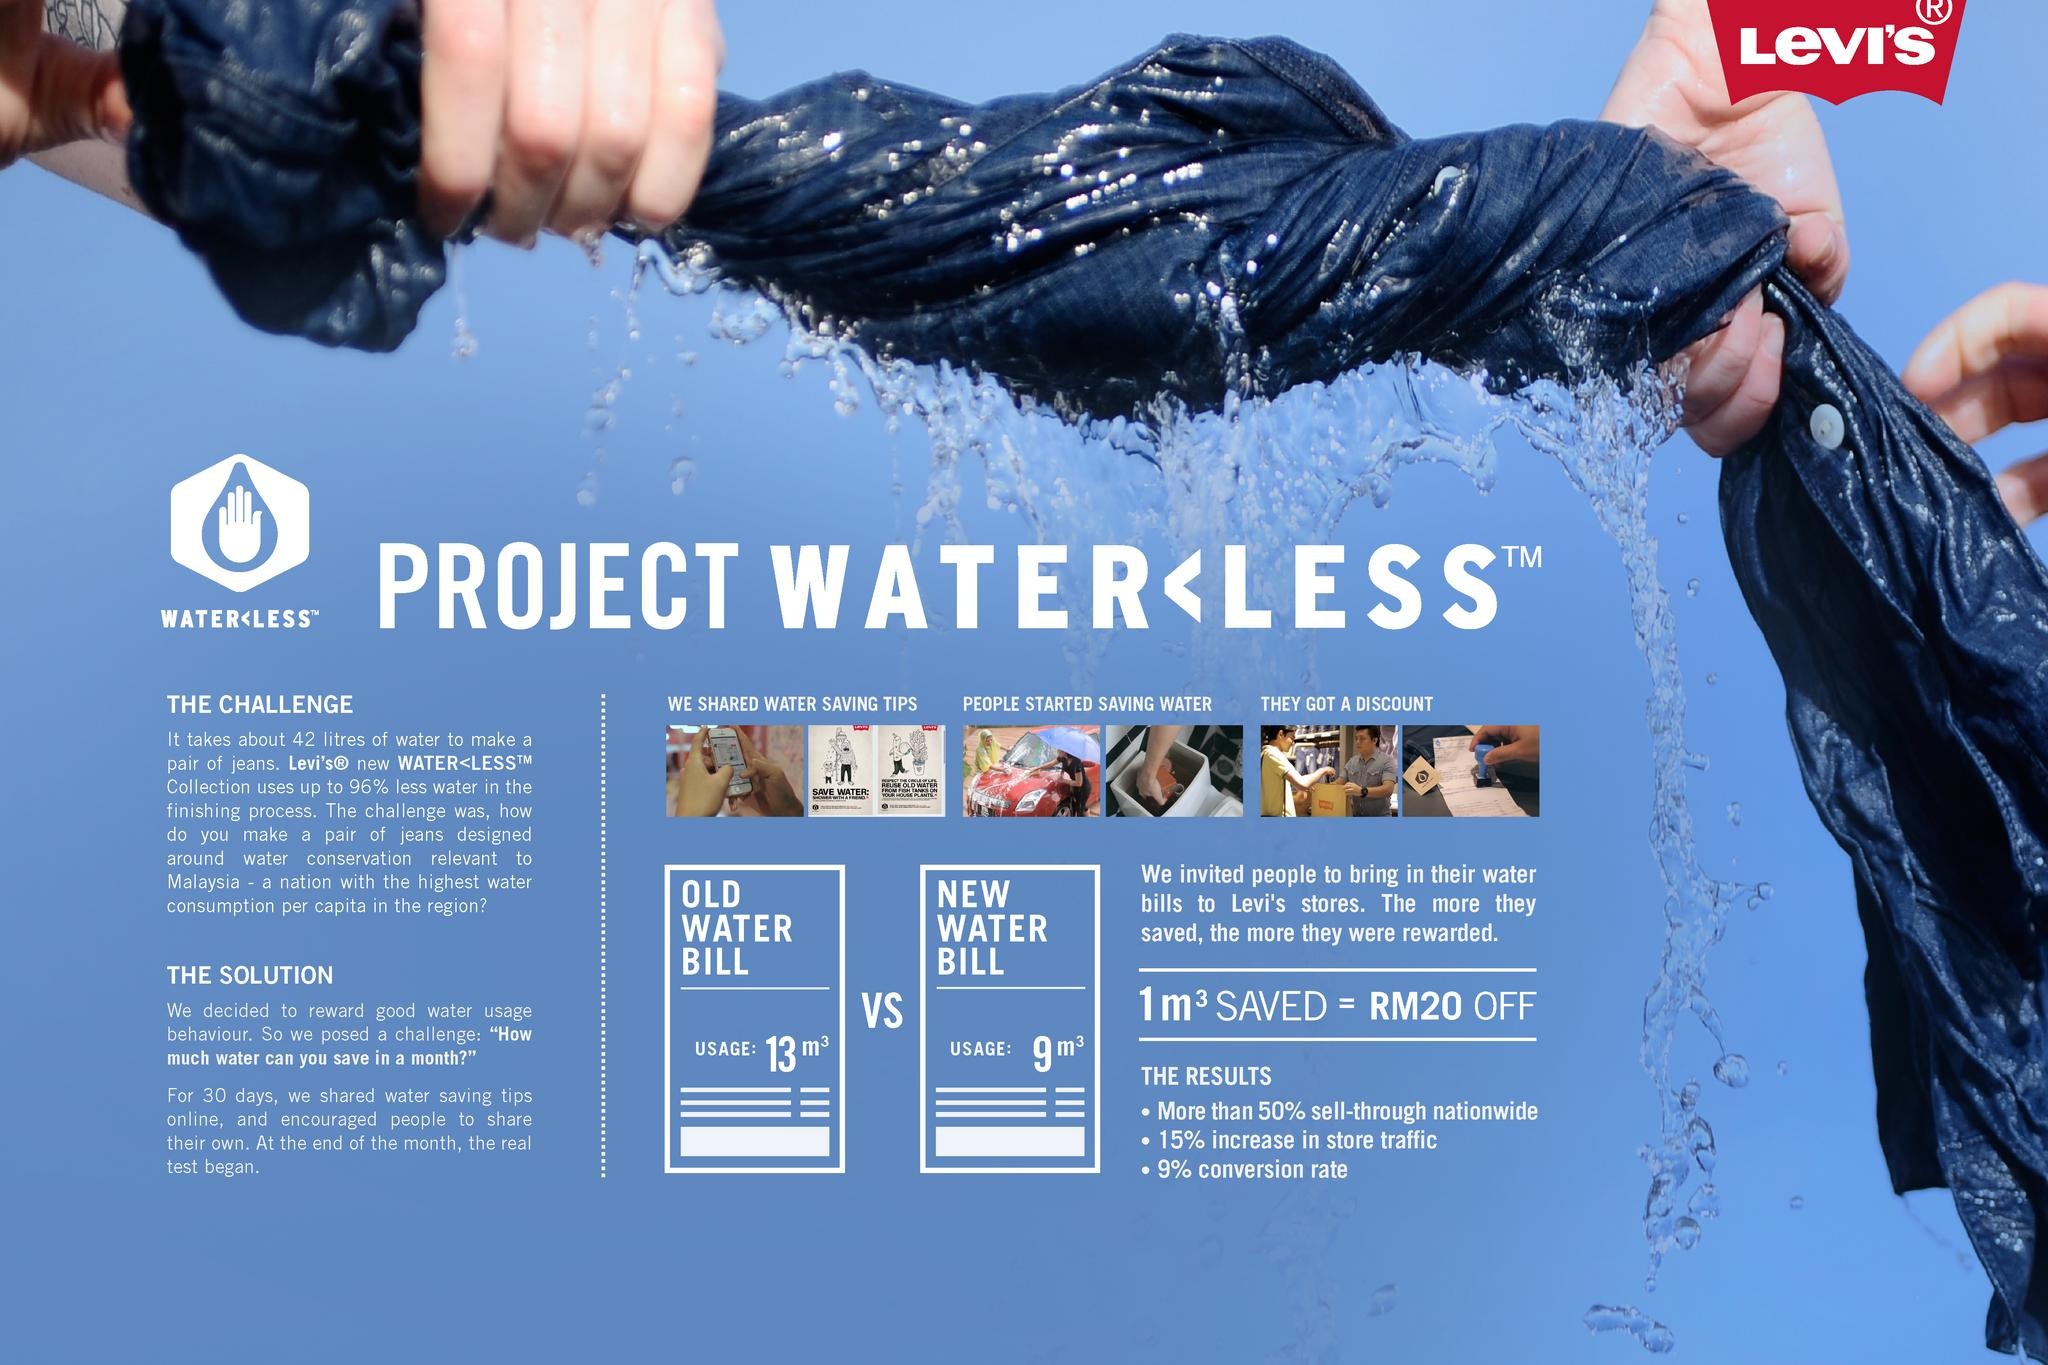 PROJECT WATERLESS